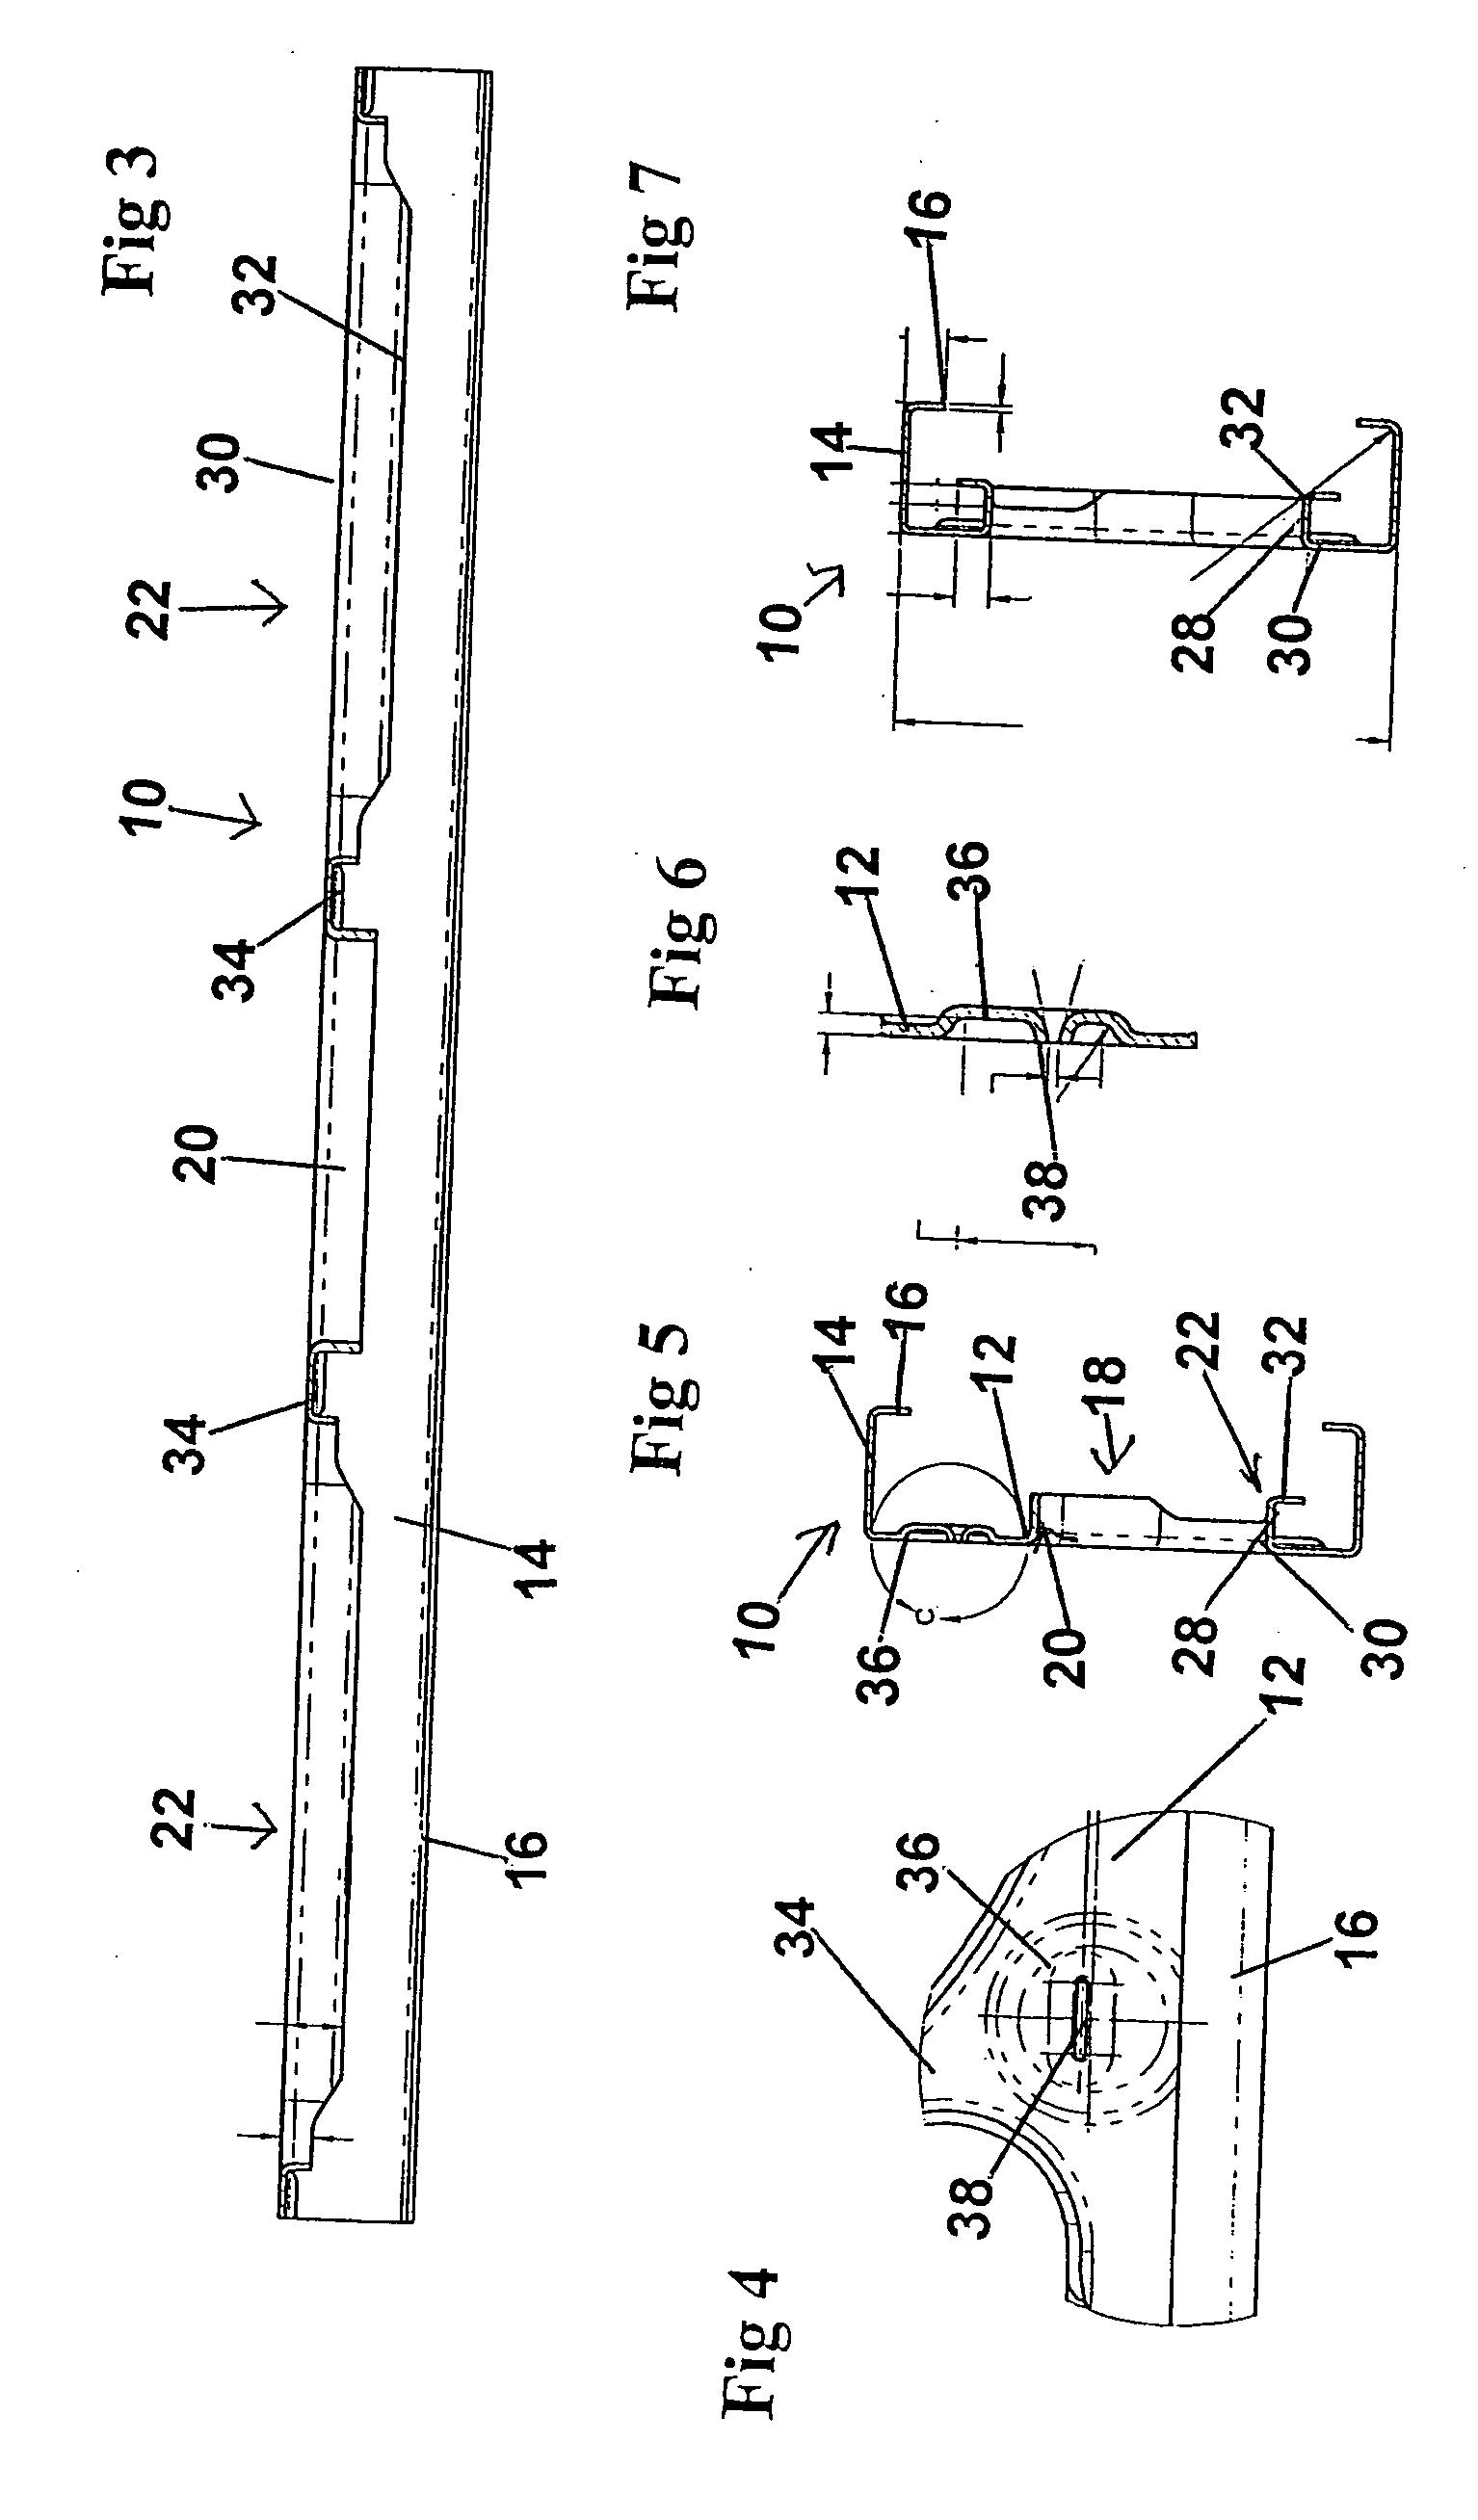 Steel stud with openings and edge formations and method for making such a steel stud